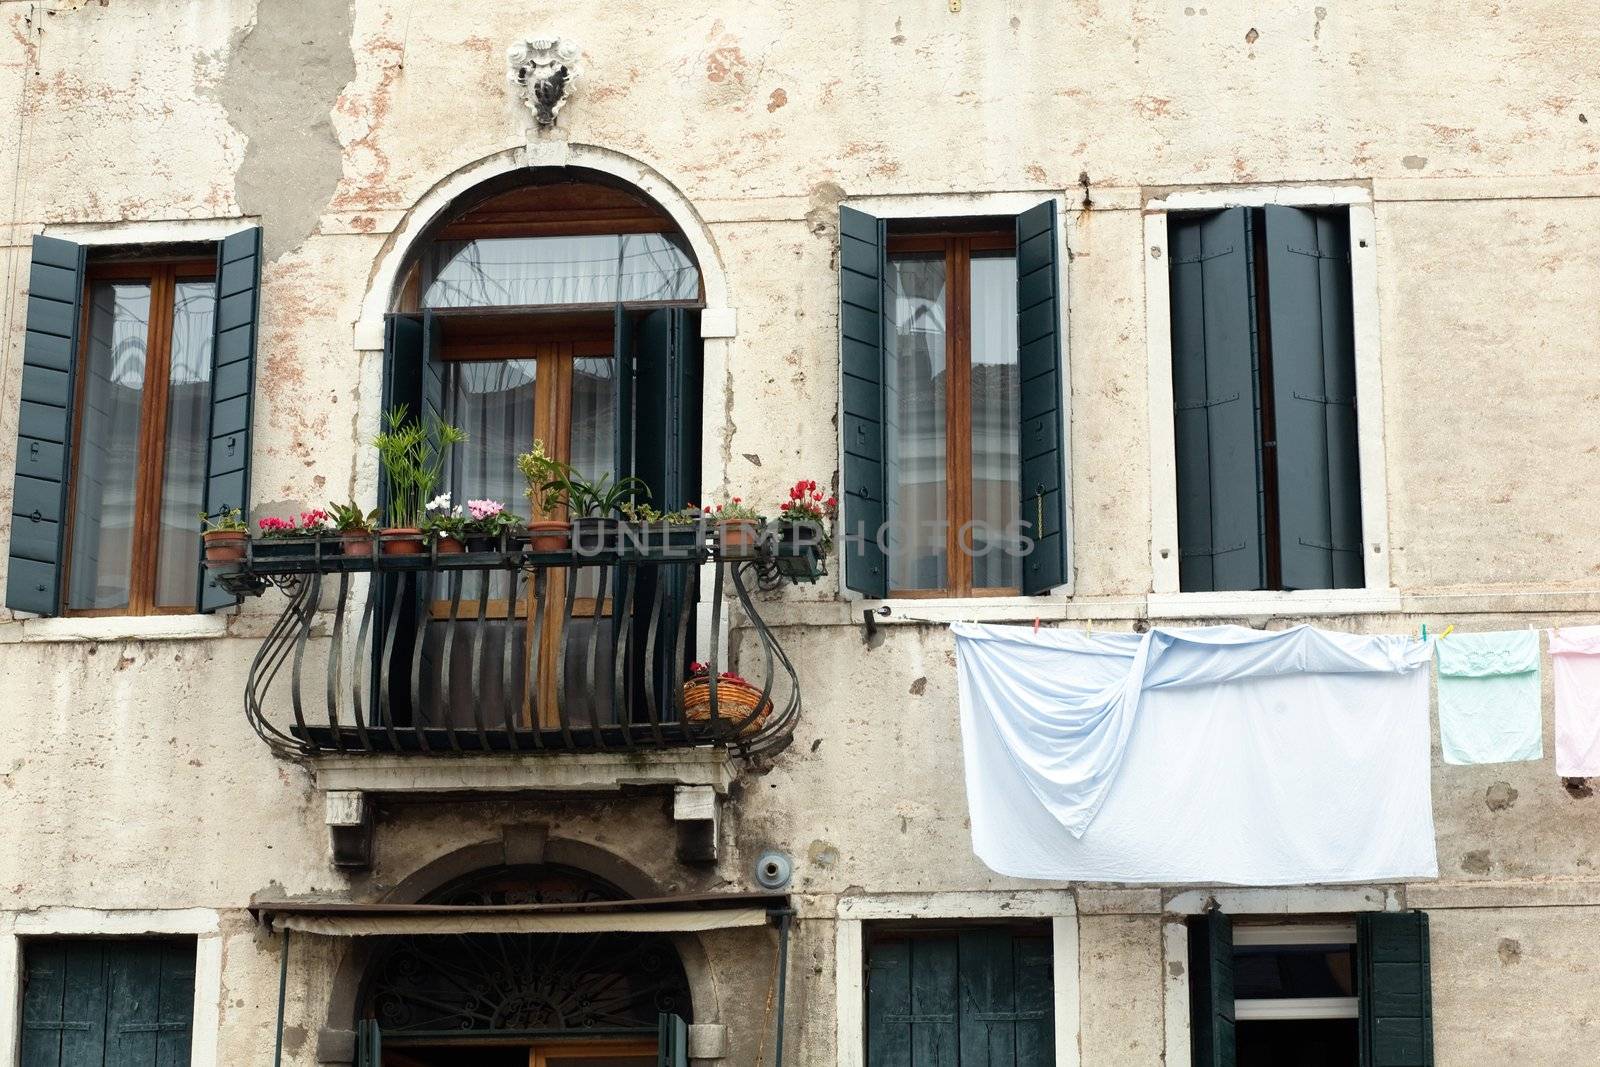 An image of windows and a balcony